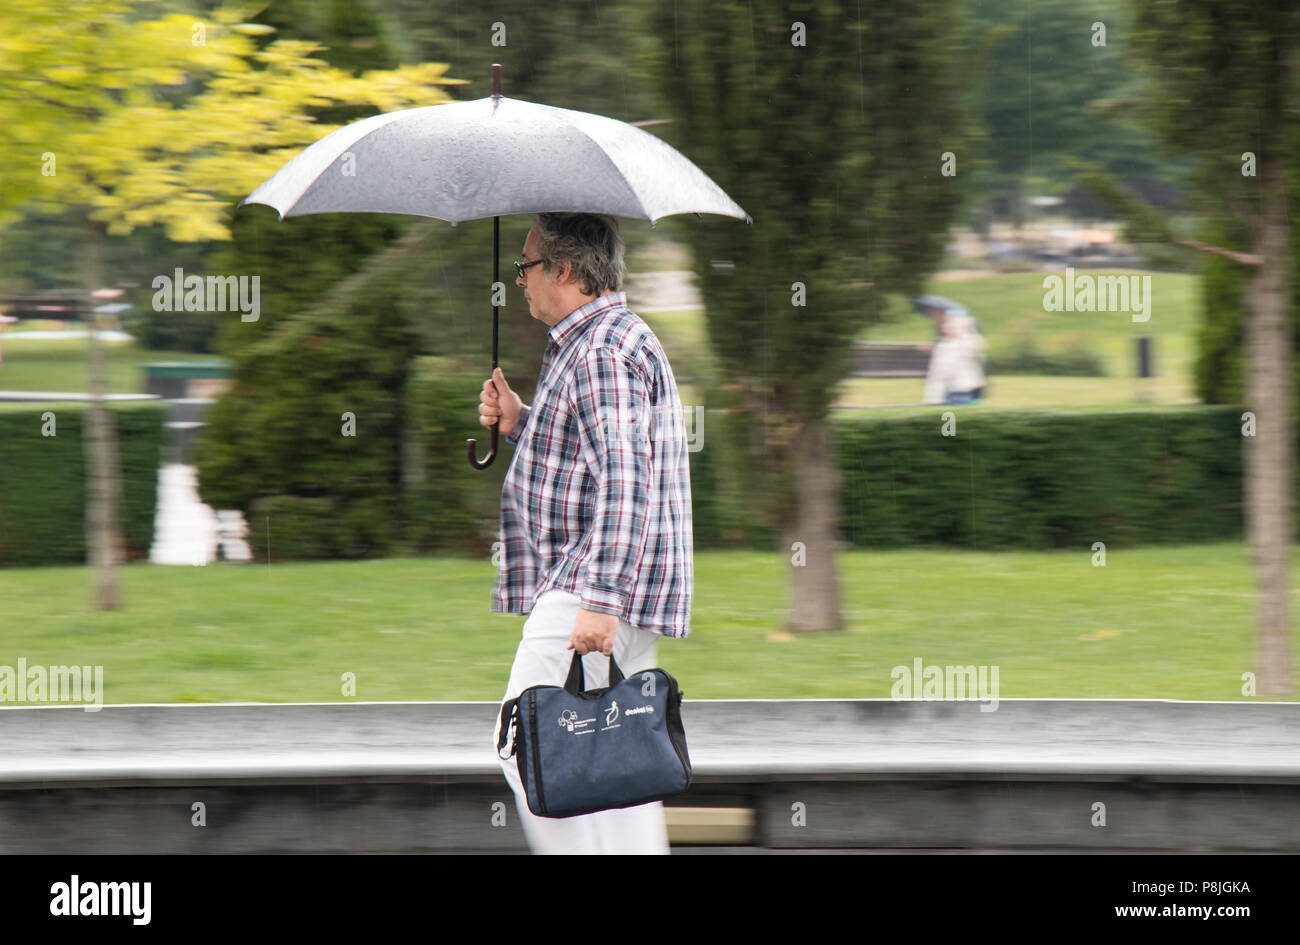 Belgrade, Serbia - June 14, 2018: One middle age man walking under umbrella in the spring rain in the city park , holding a bag Stock Photo